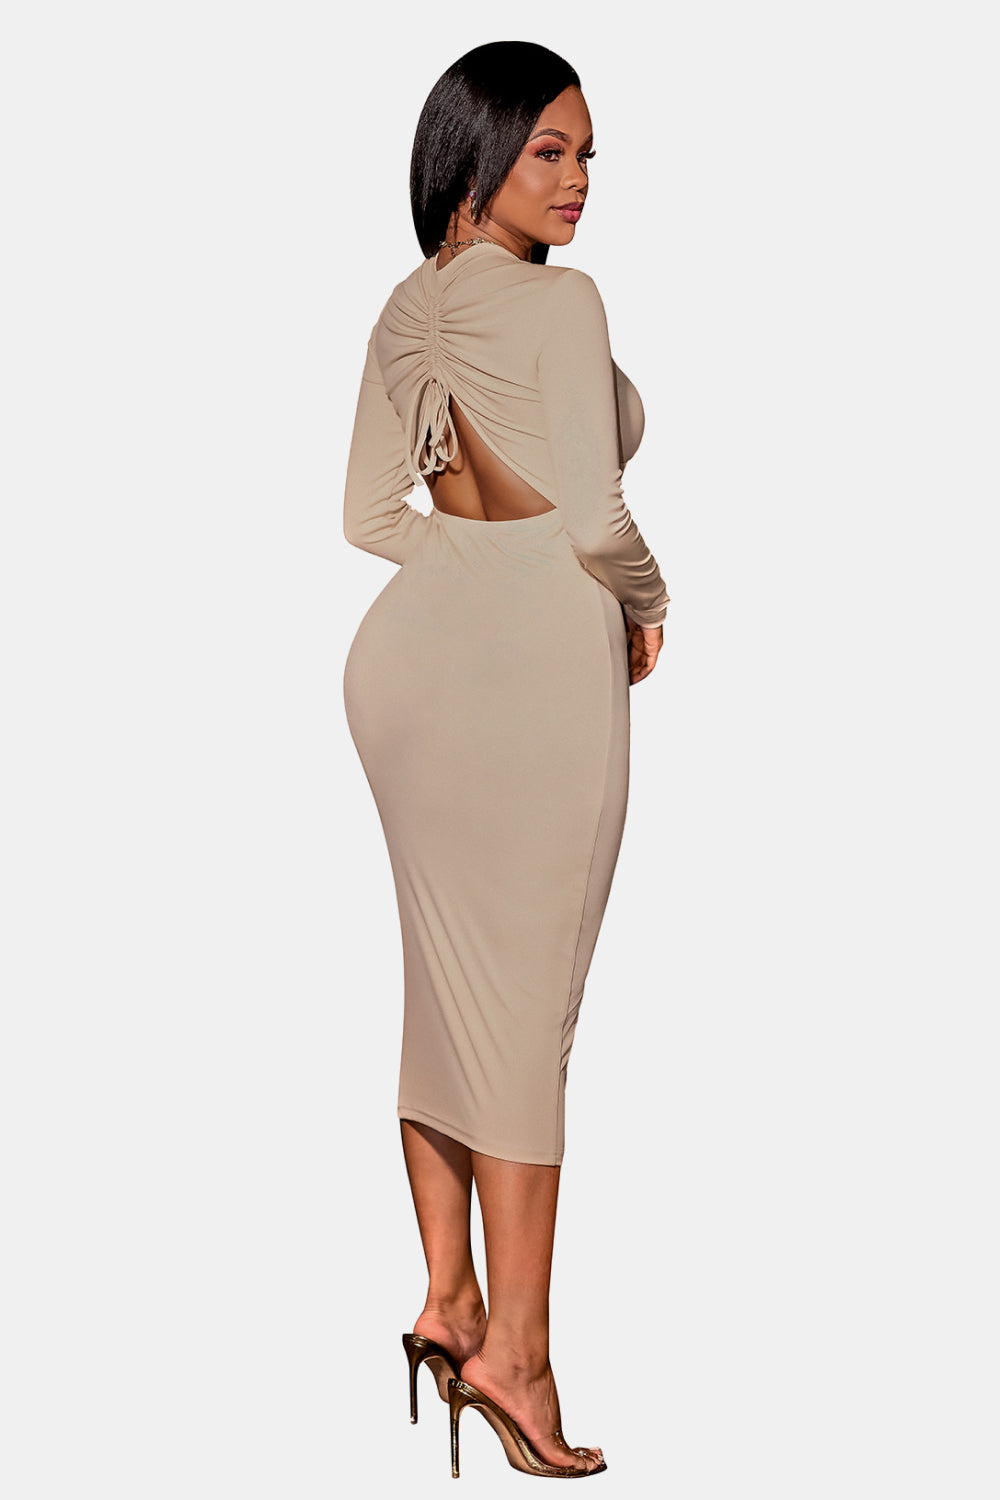 Villa Blvd Zip Up Backless Drawstring Dress ☛ Multiple Colors Available ☚